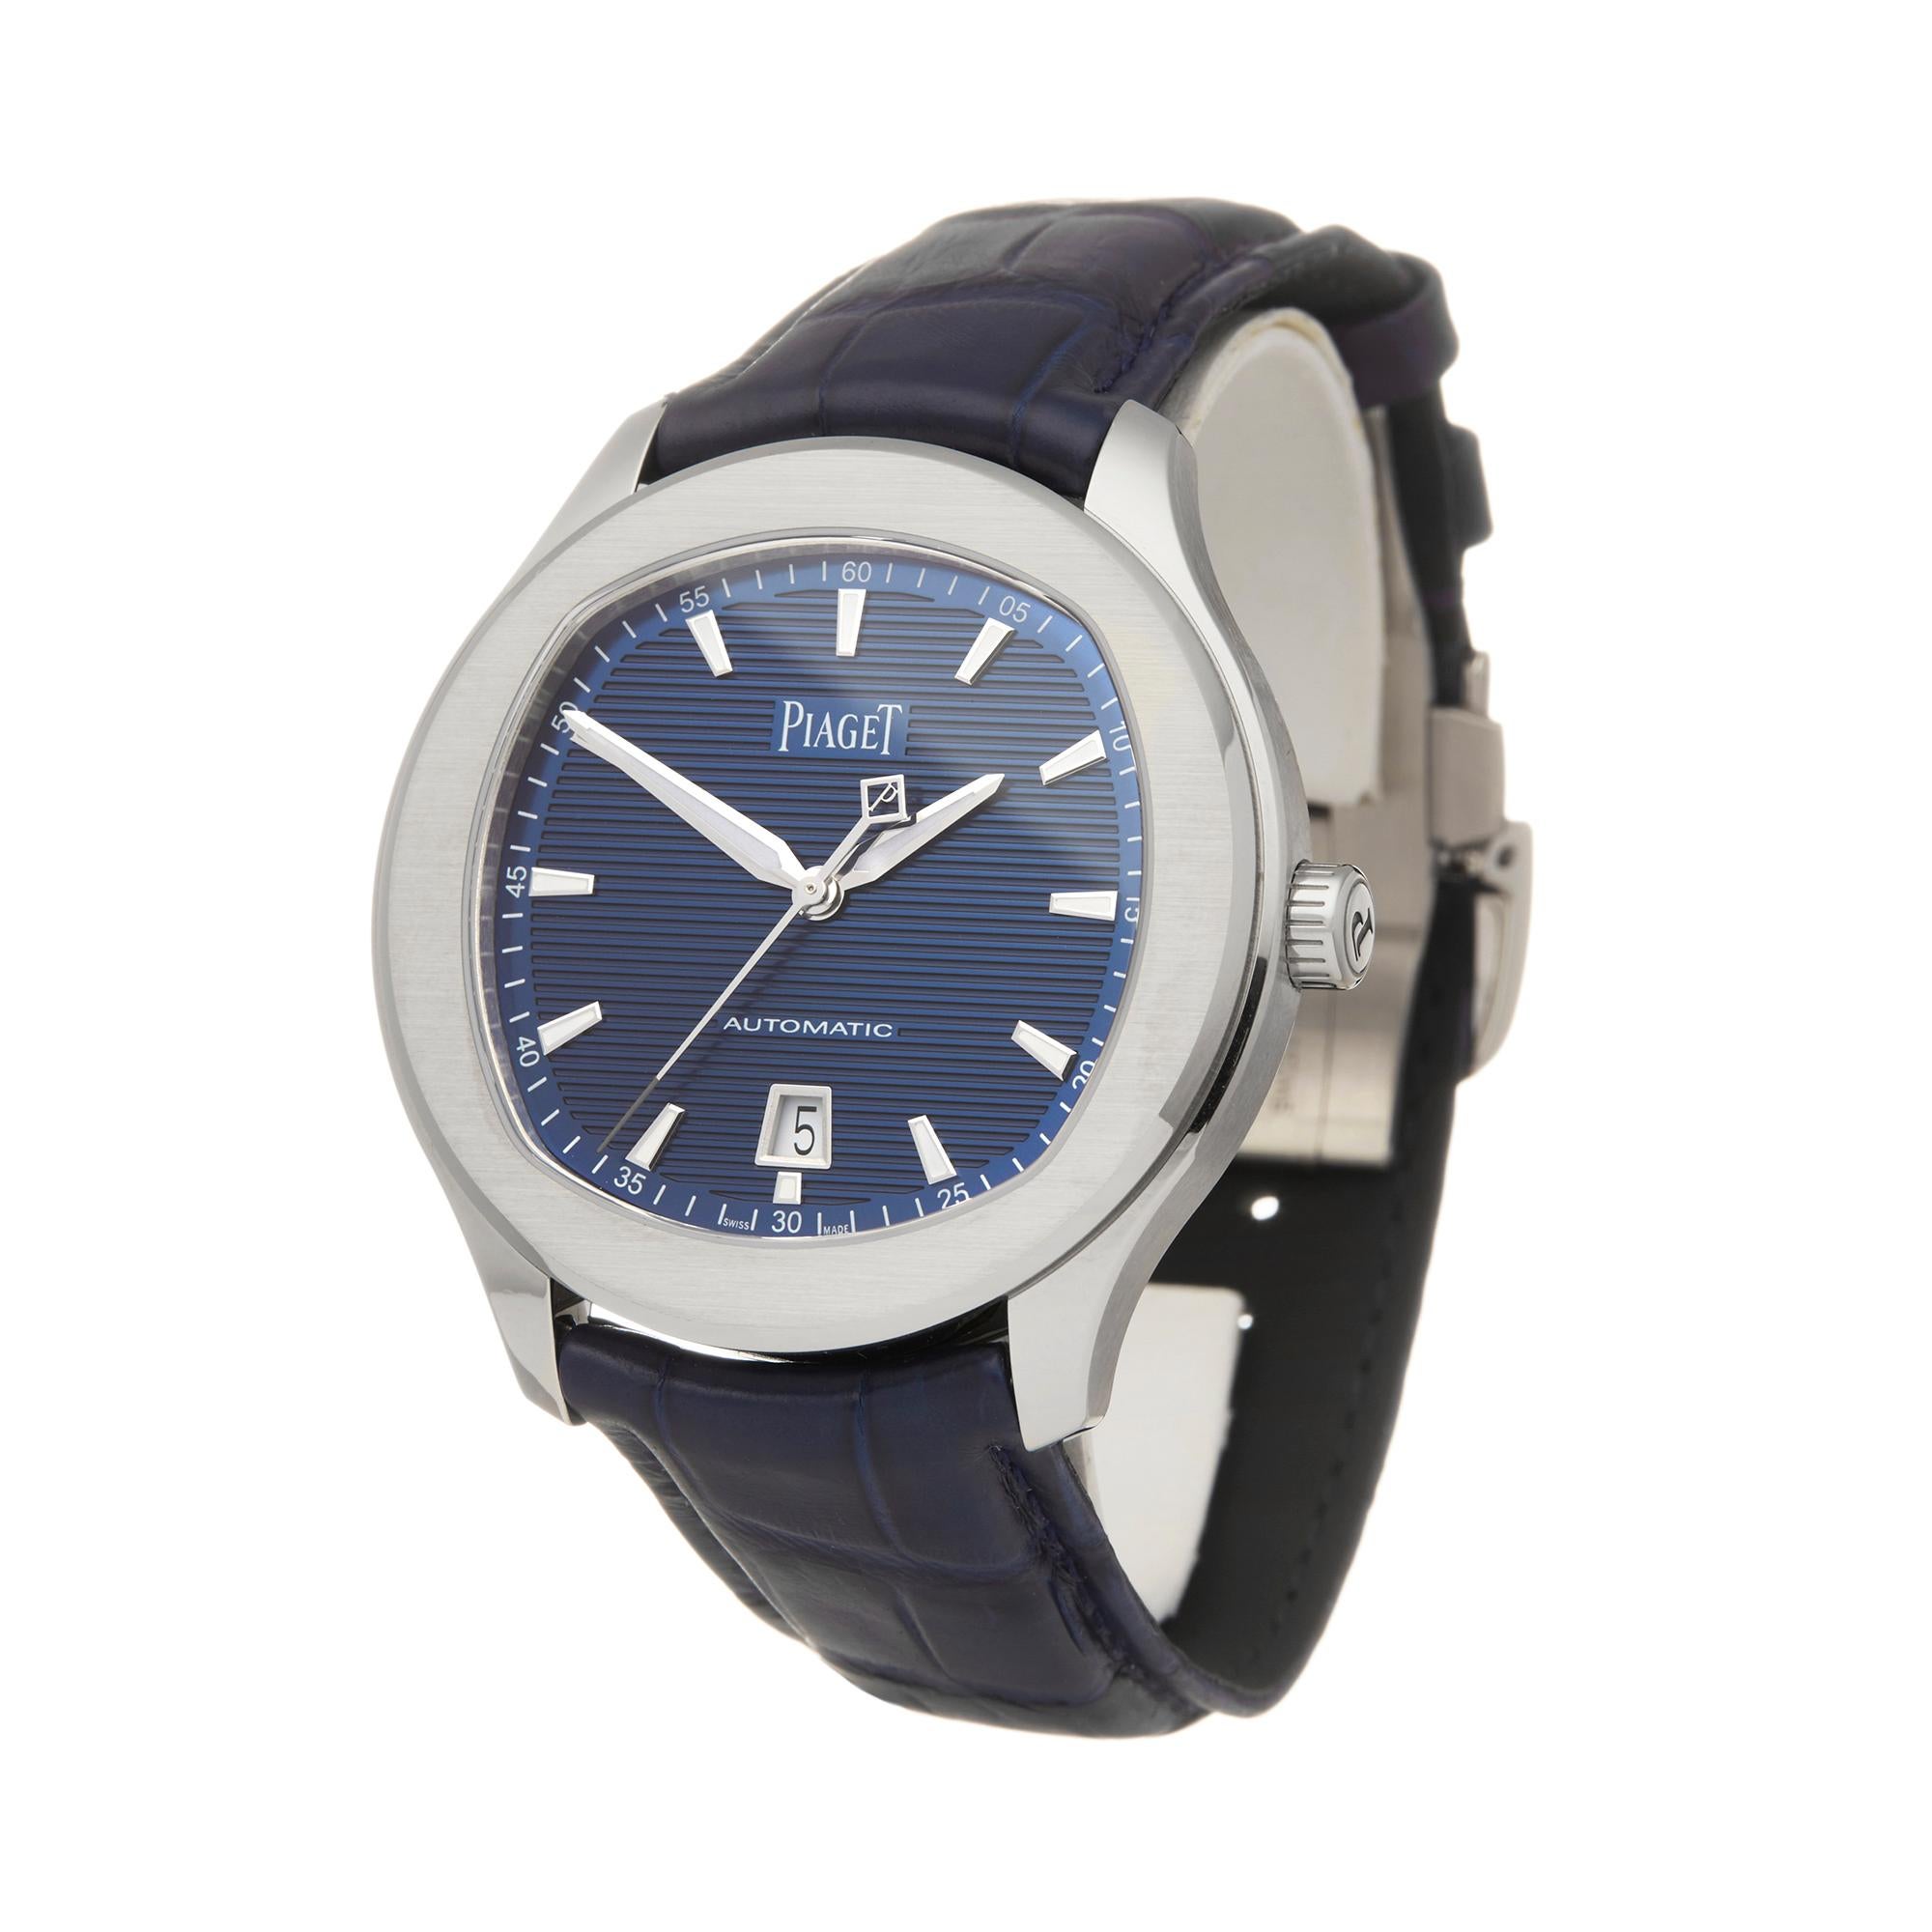 Ref: W5900
Manufacturer: Piaget
Model: Polo
Model Ref: GOA43001
Age: 24th January 2019
Gender: Mens
Complete With: Box, Manuals & Guarantee
Dial: Blue Baton
Glass: Sapphire Crystal
Movement: Automatic
Water Resistance: To Manufacturers